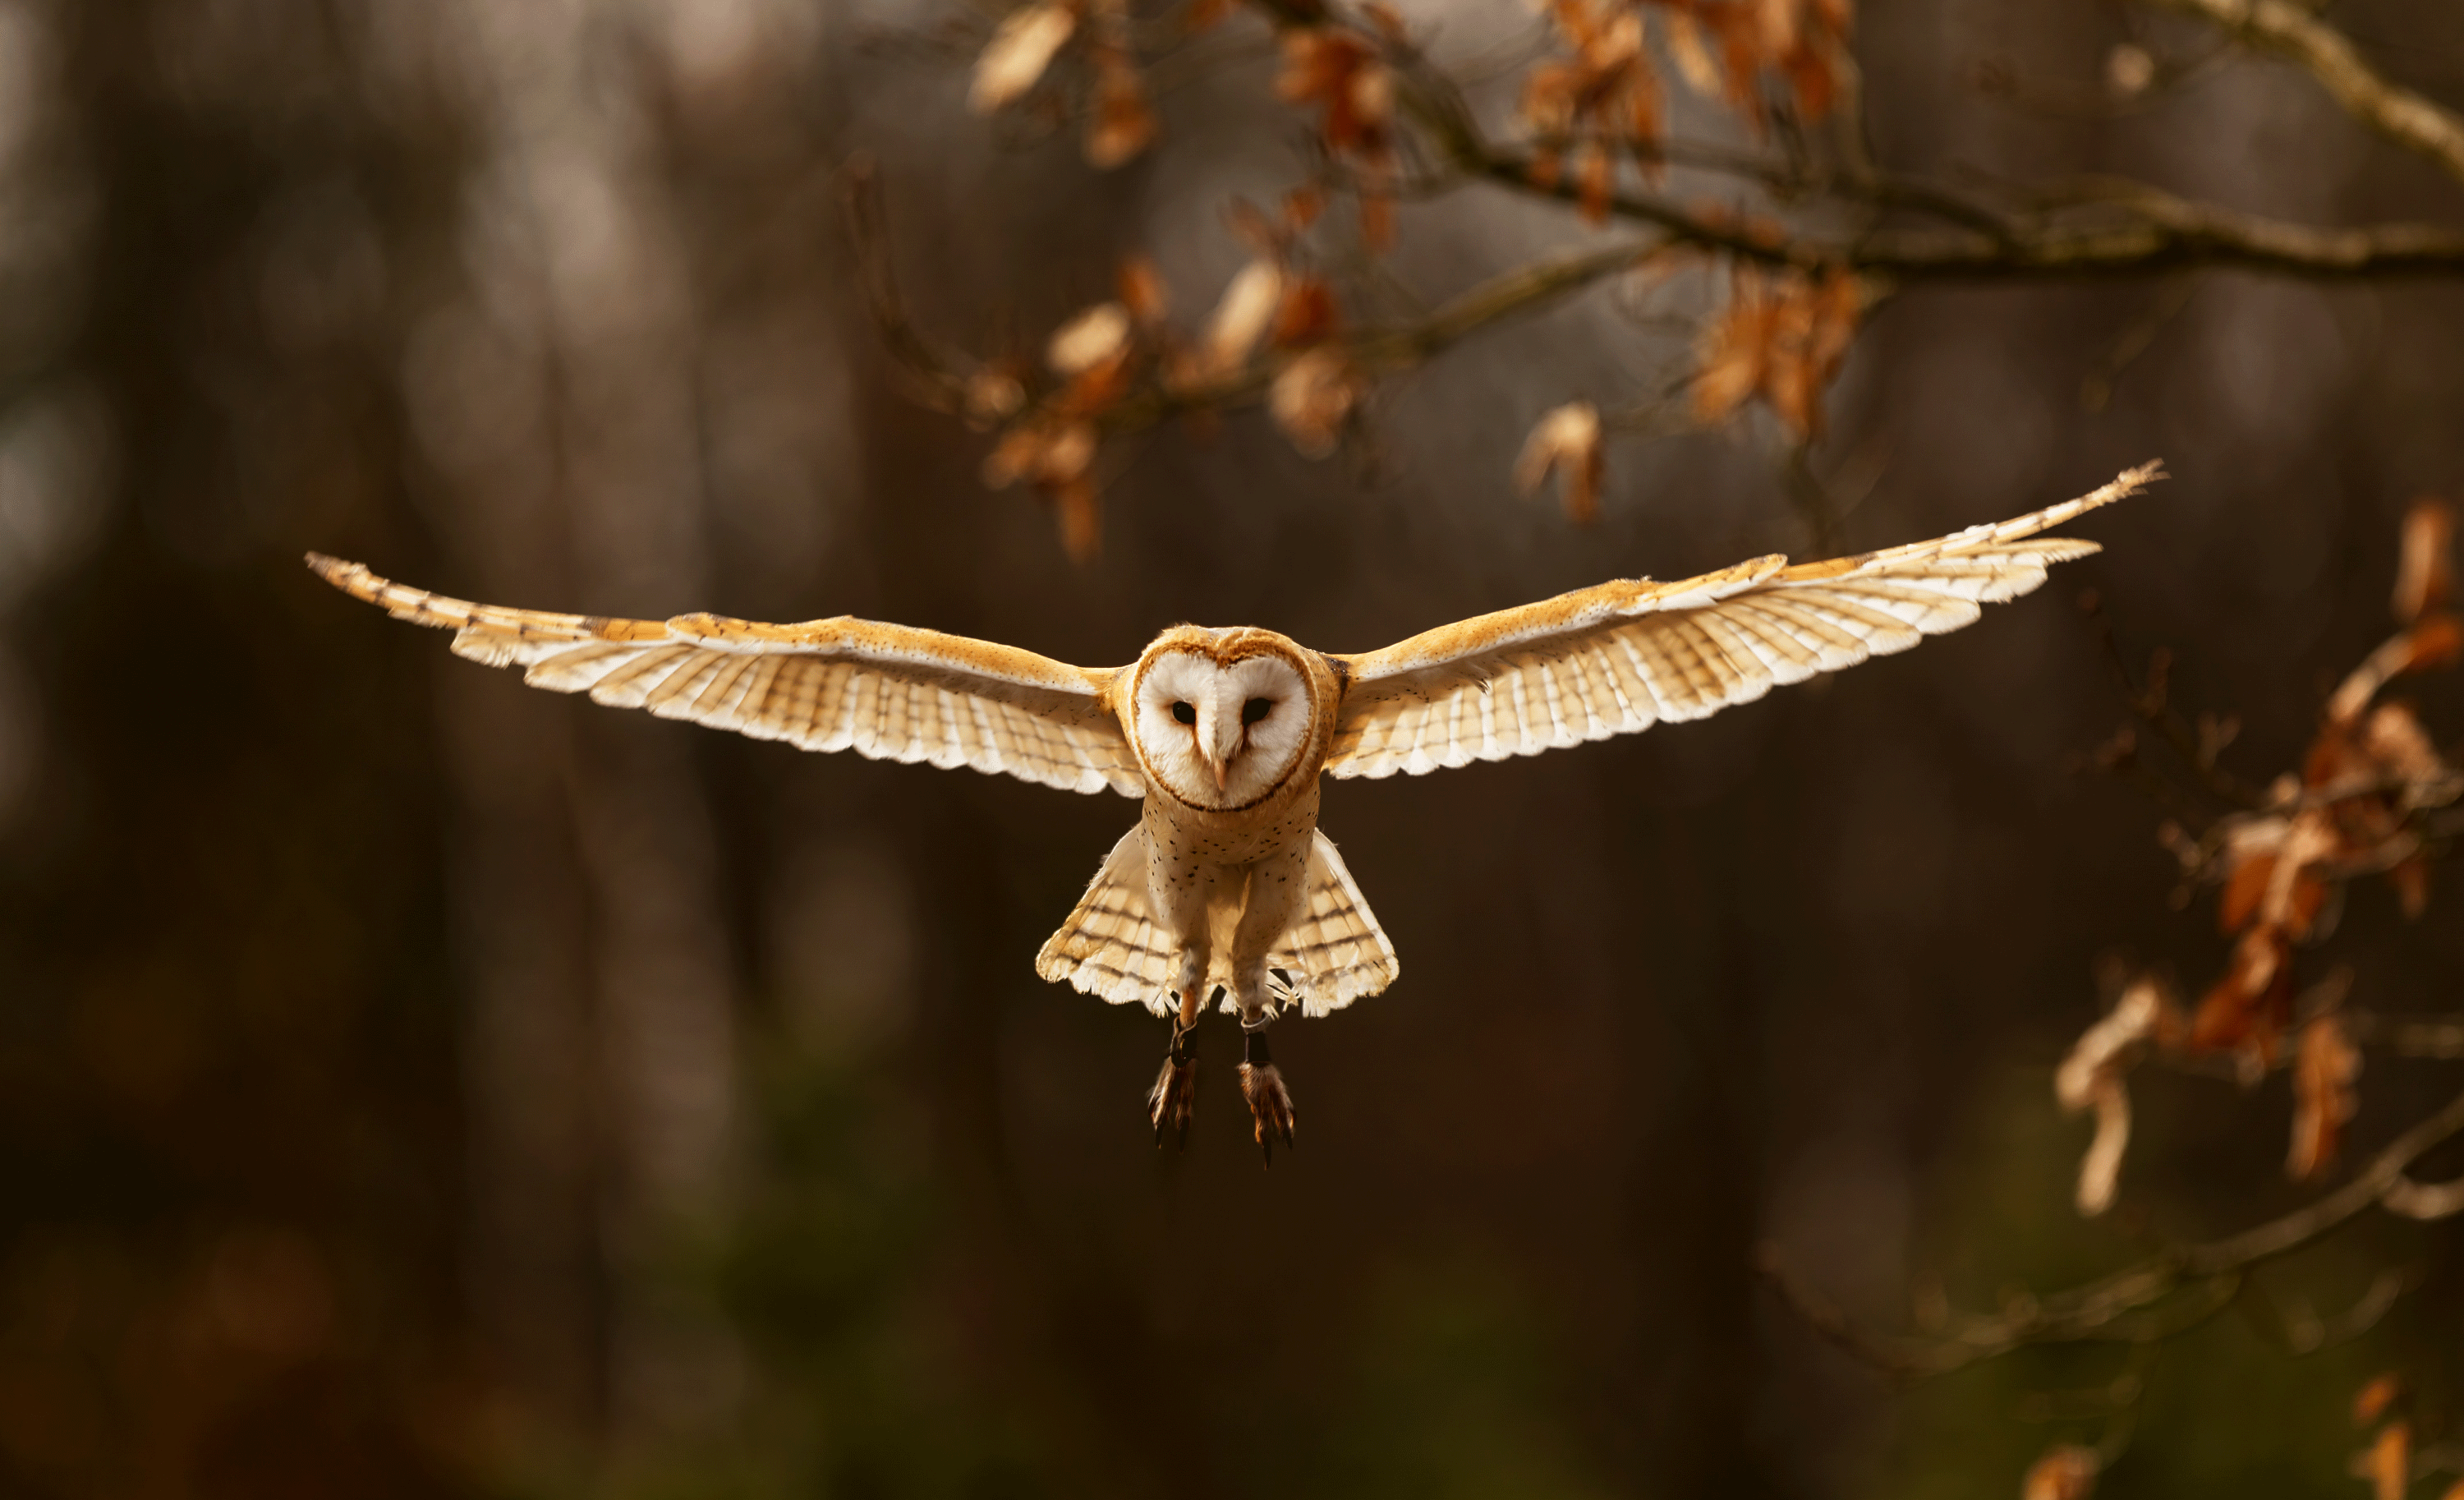 A barn owl in flight illuminated by sunlight in an autumn forest..